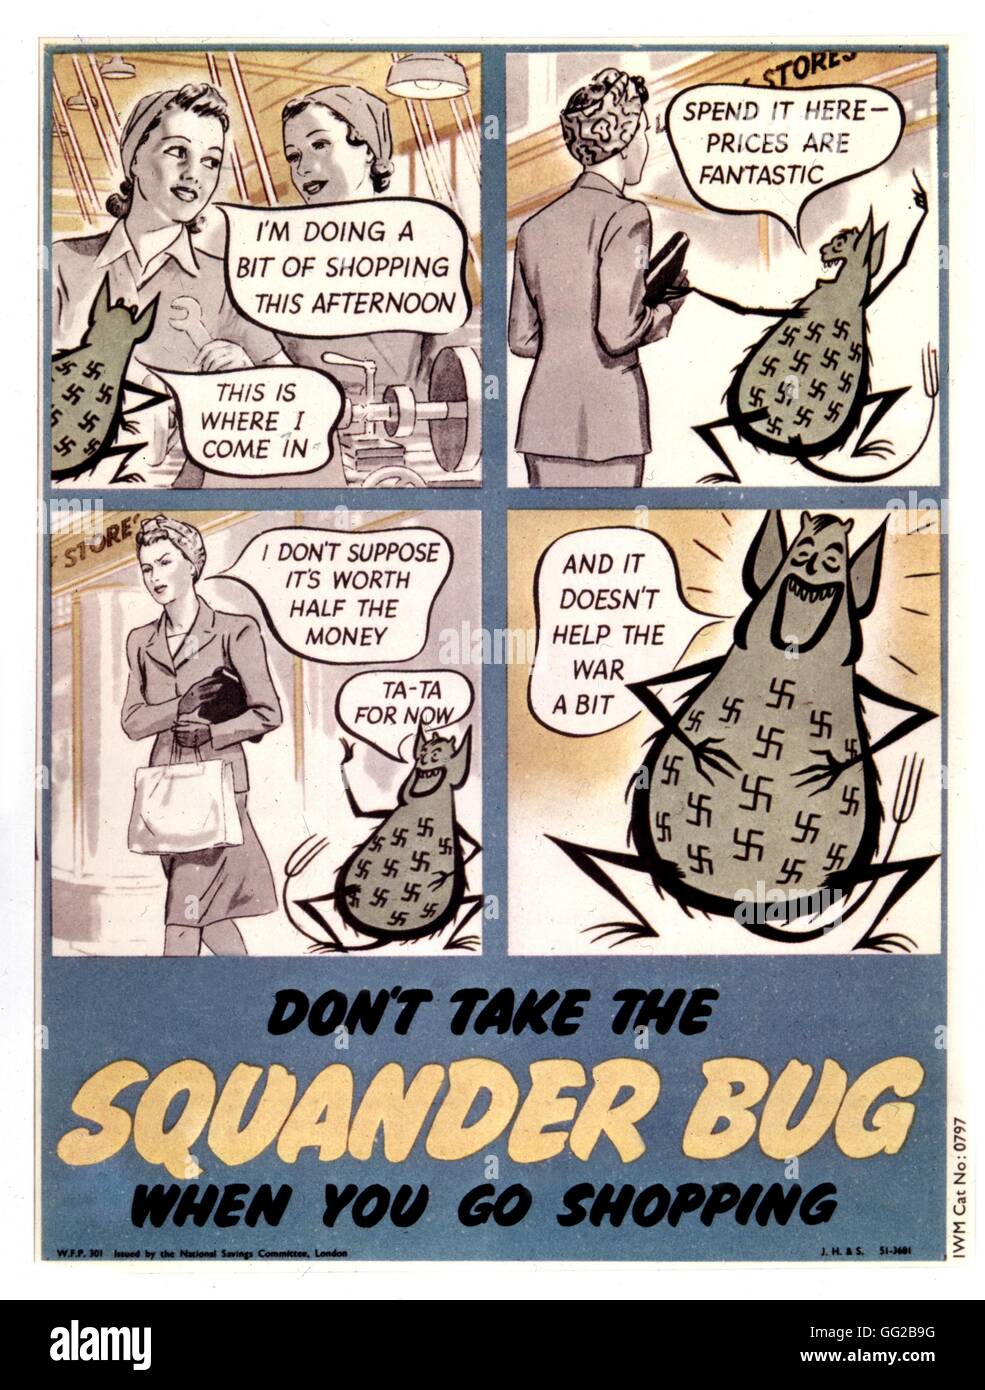 War poster against nazism, using the 'Squander Bug' drawings 20th century England - World War II London, Imperial war museum Stock Photo